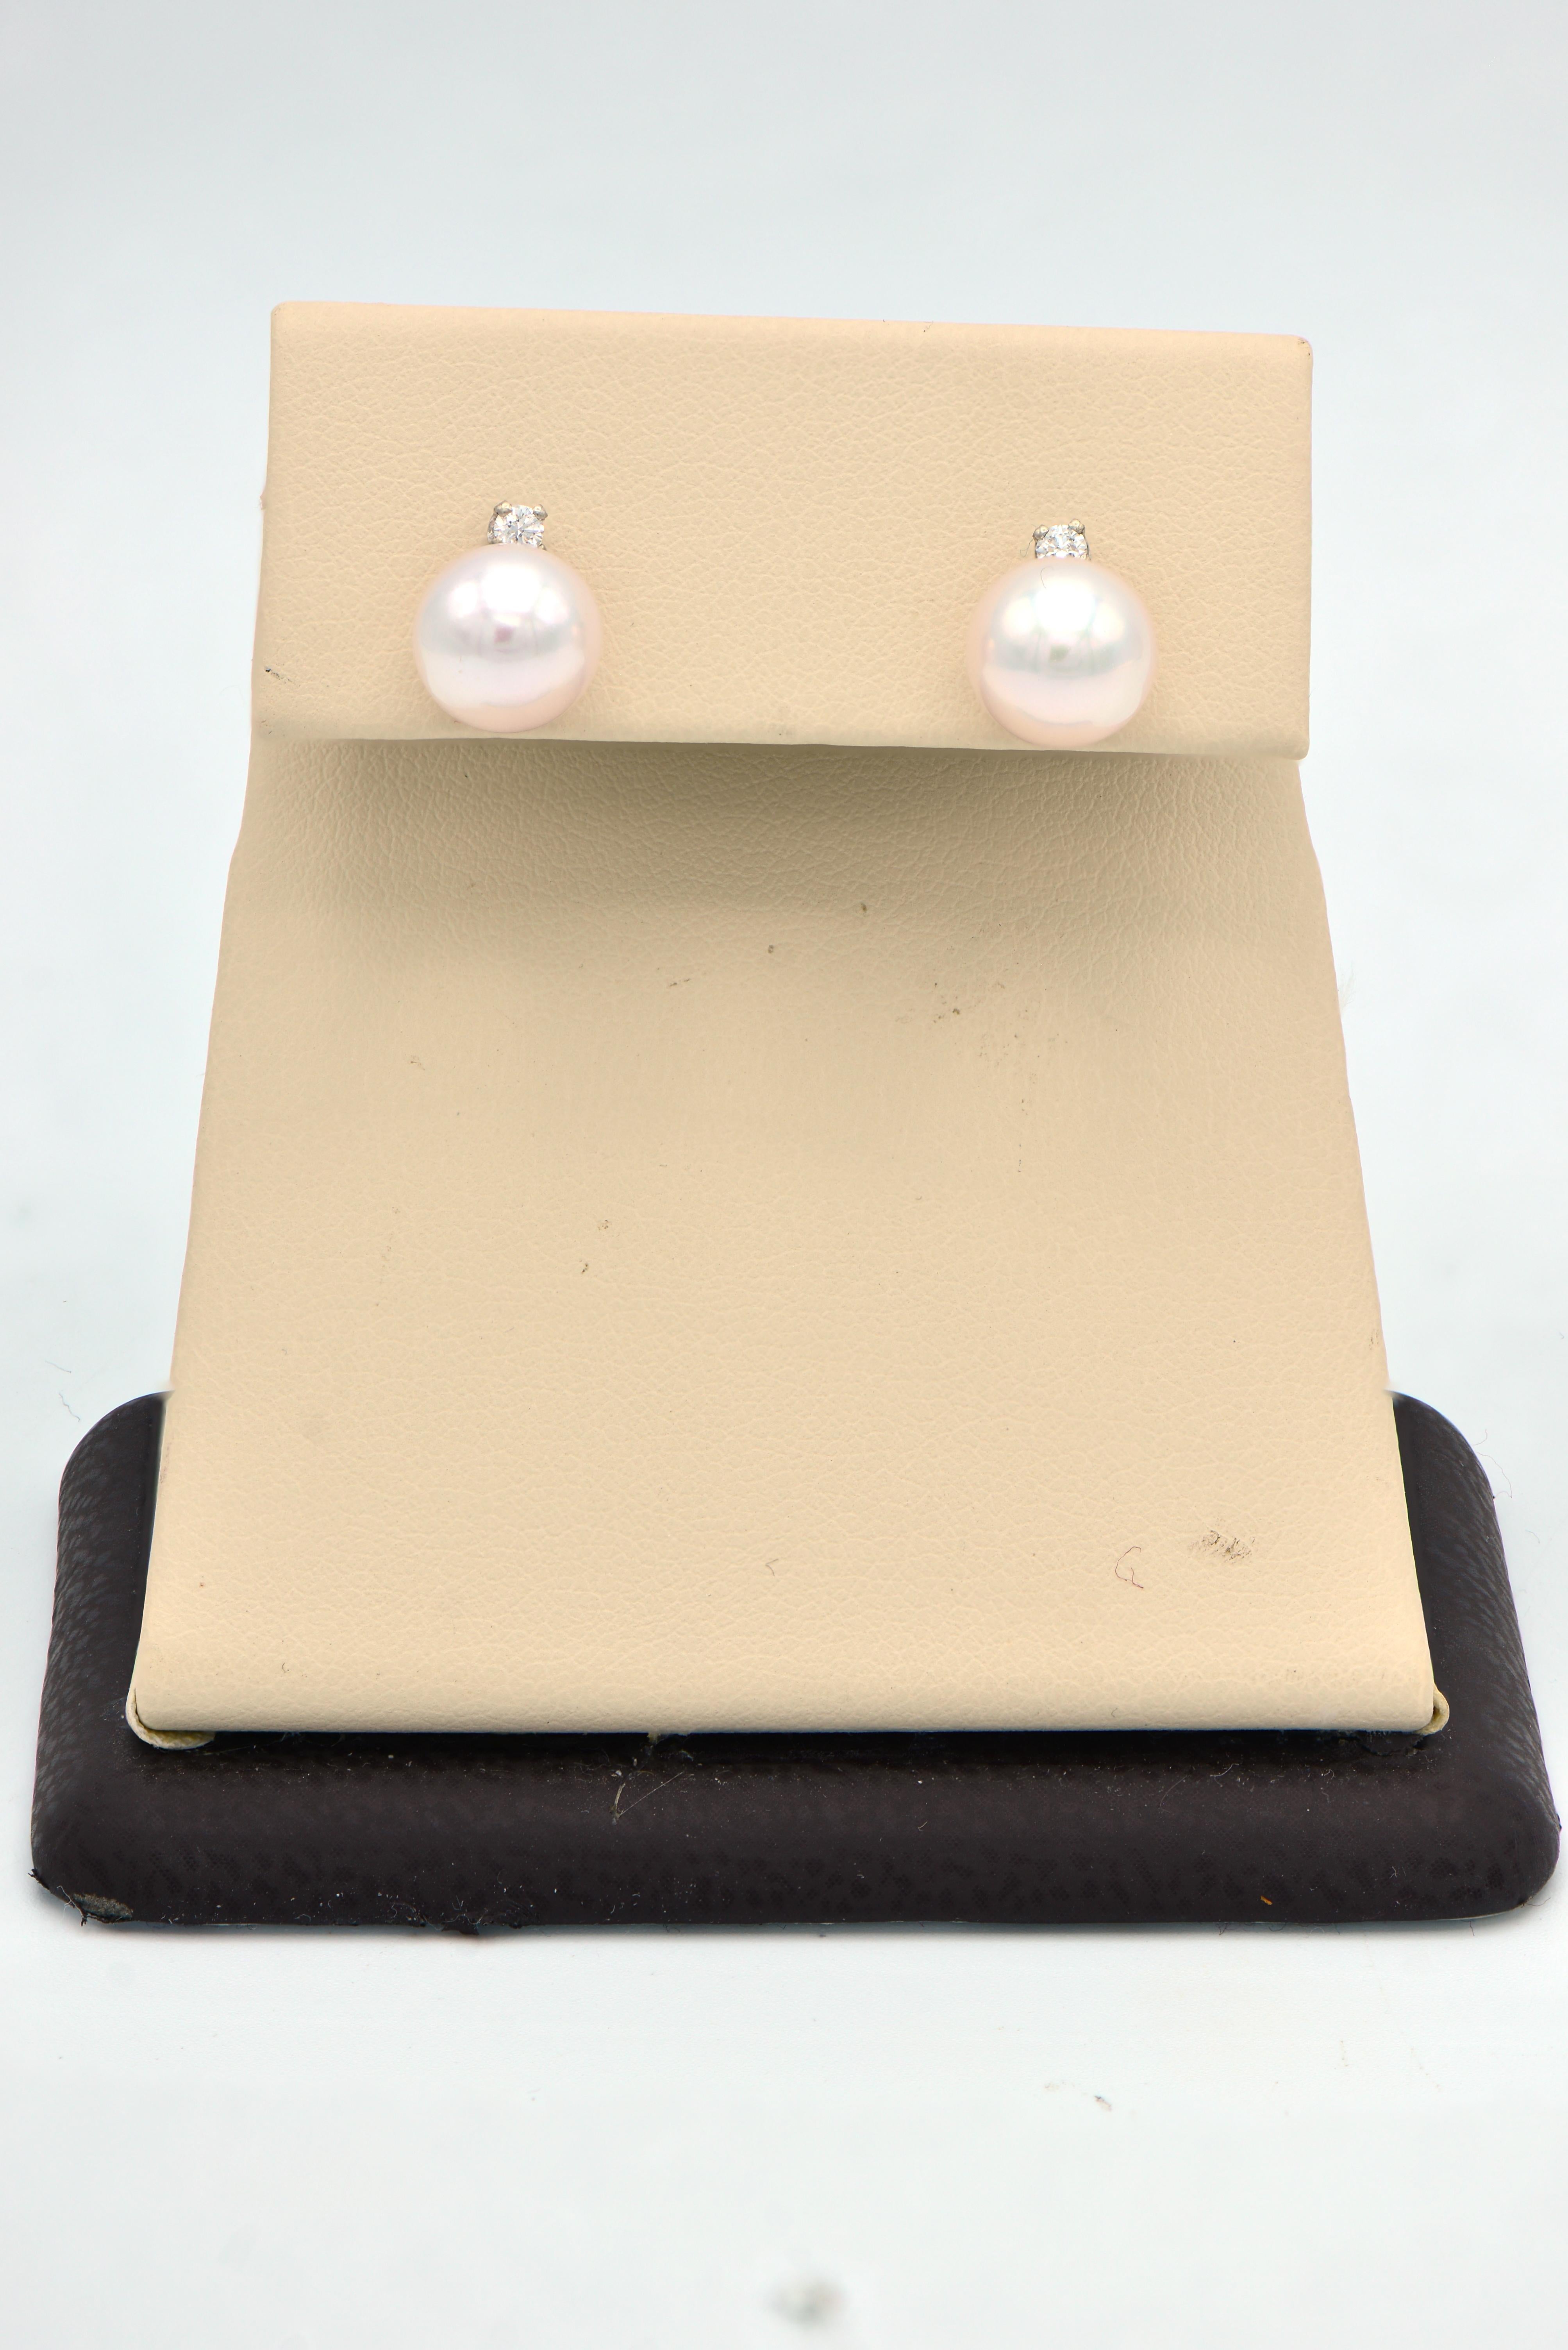 Round Cut White Cultured Pearl Stud Earring with Diamond in 14 Karat White Gold For Sale